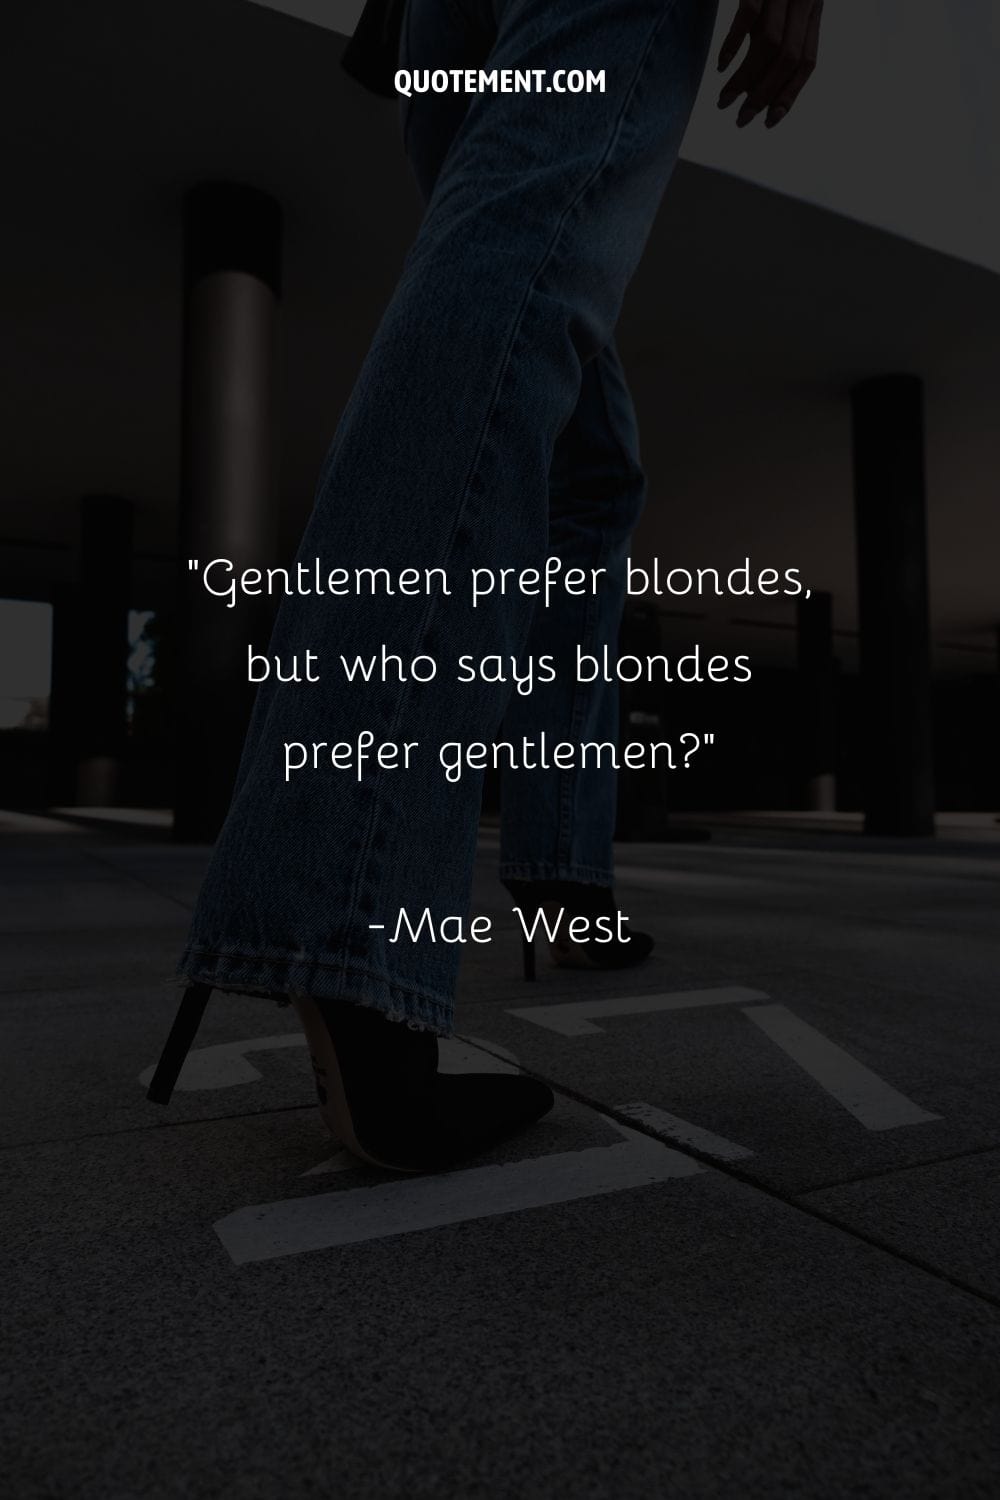 Image of denim paired with stylish high heels representing quote about blondes.